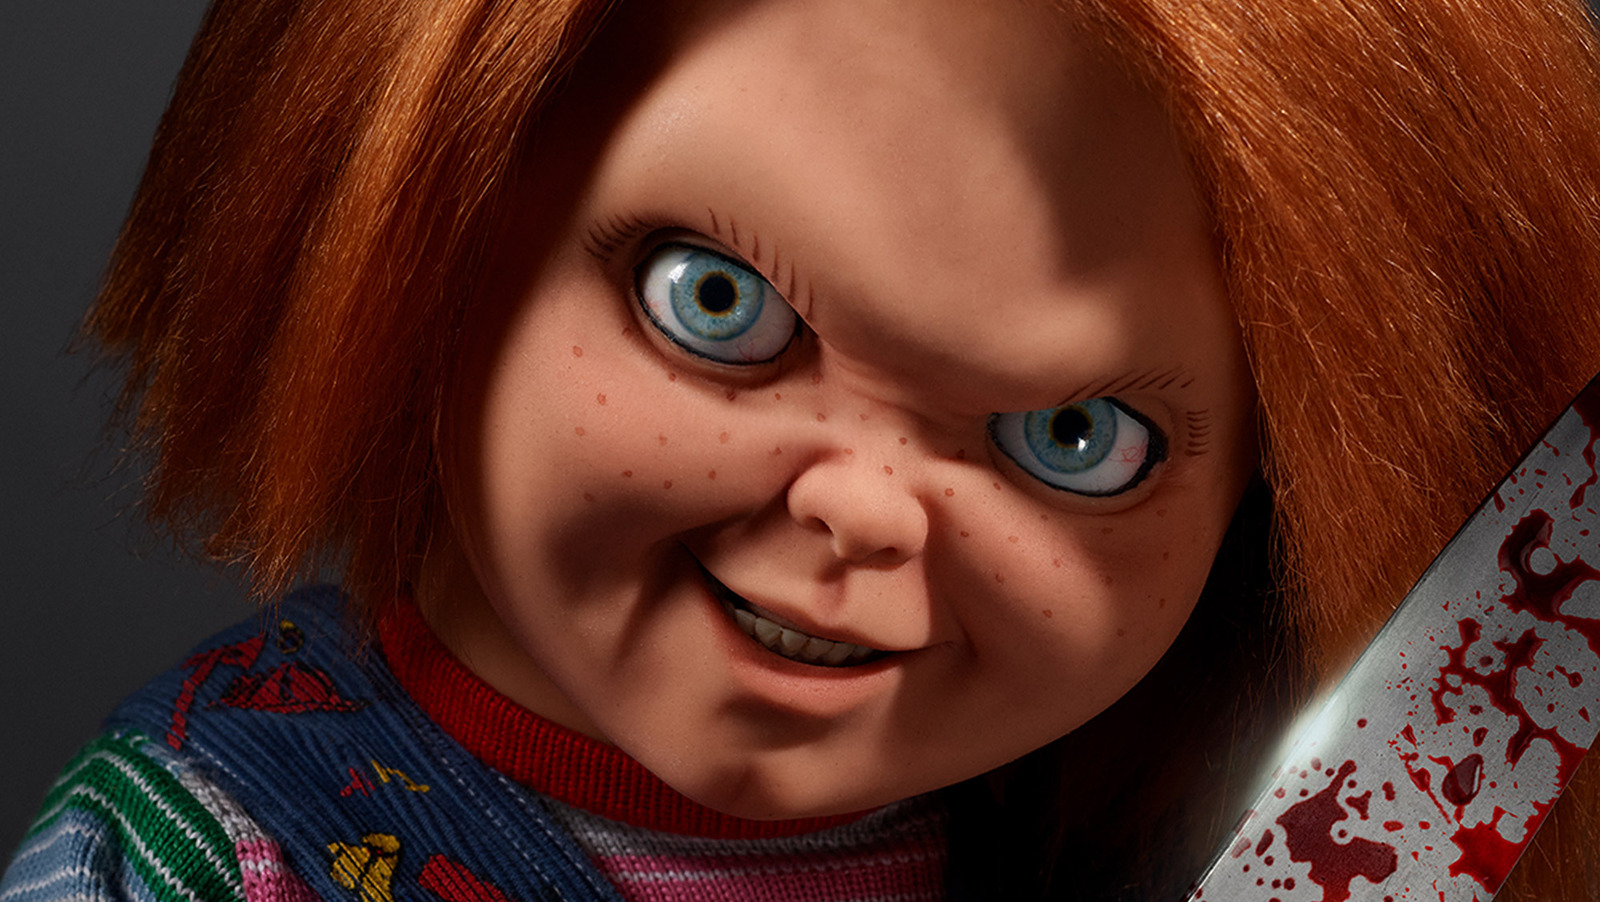 Ranked: Every Chucky movie rated from worst to best